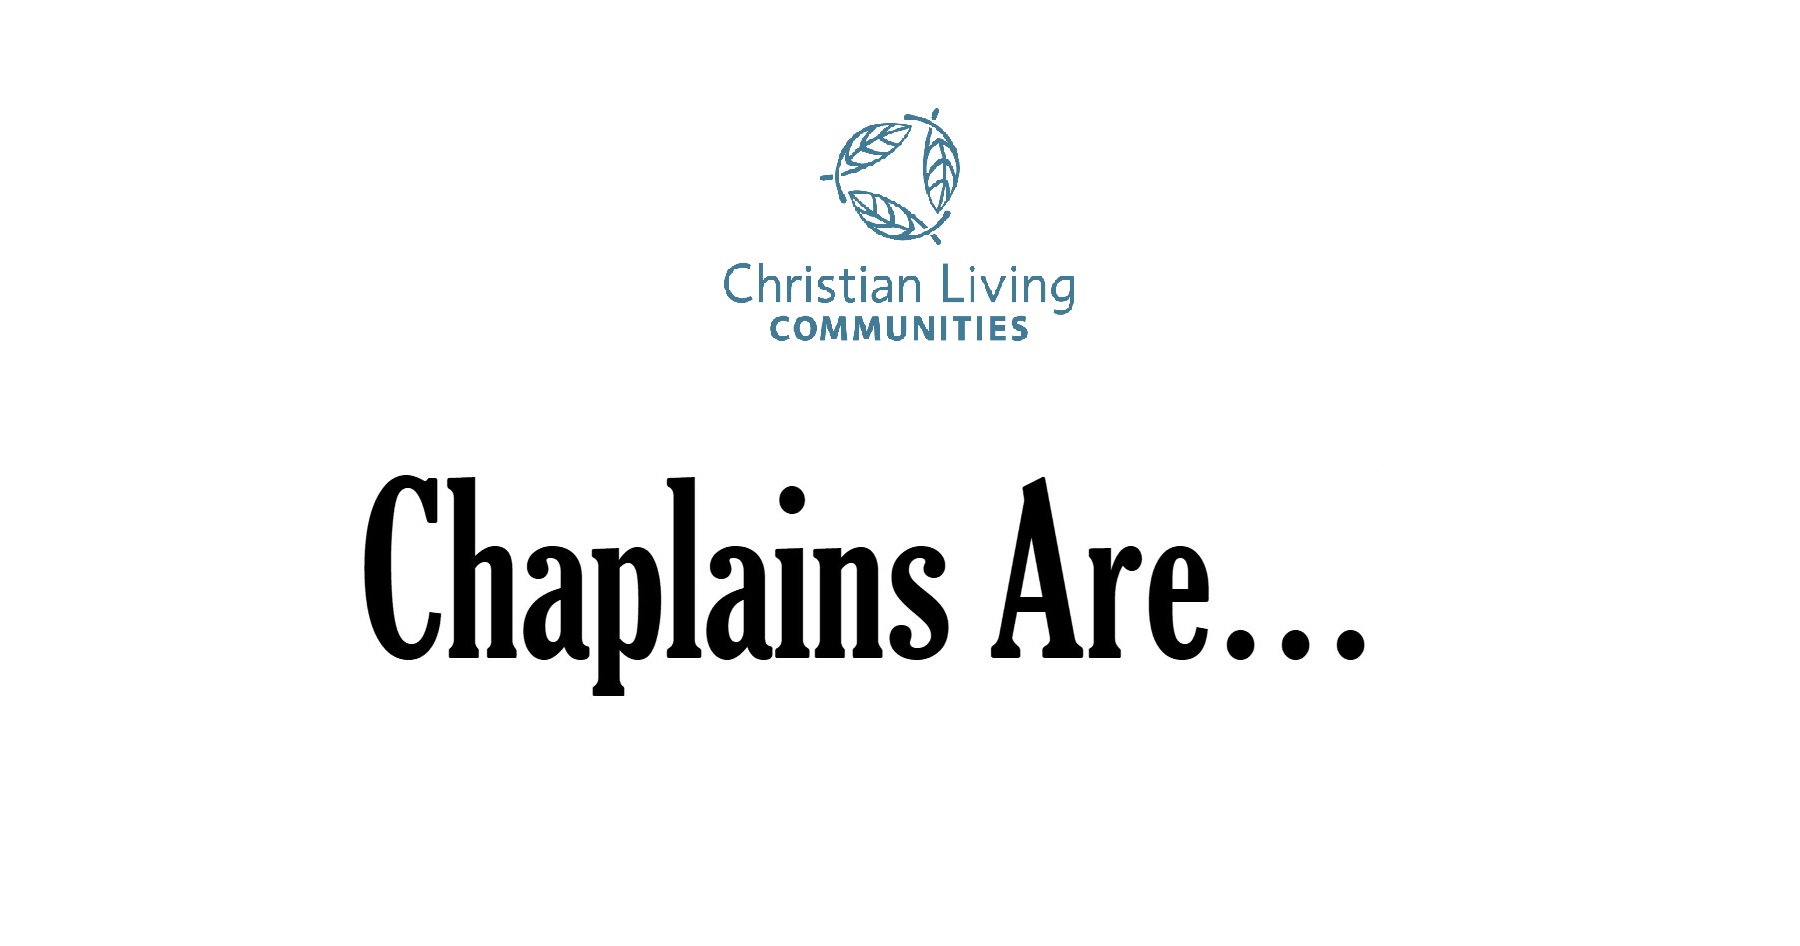 Chaplains Are...